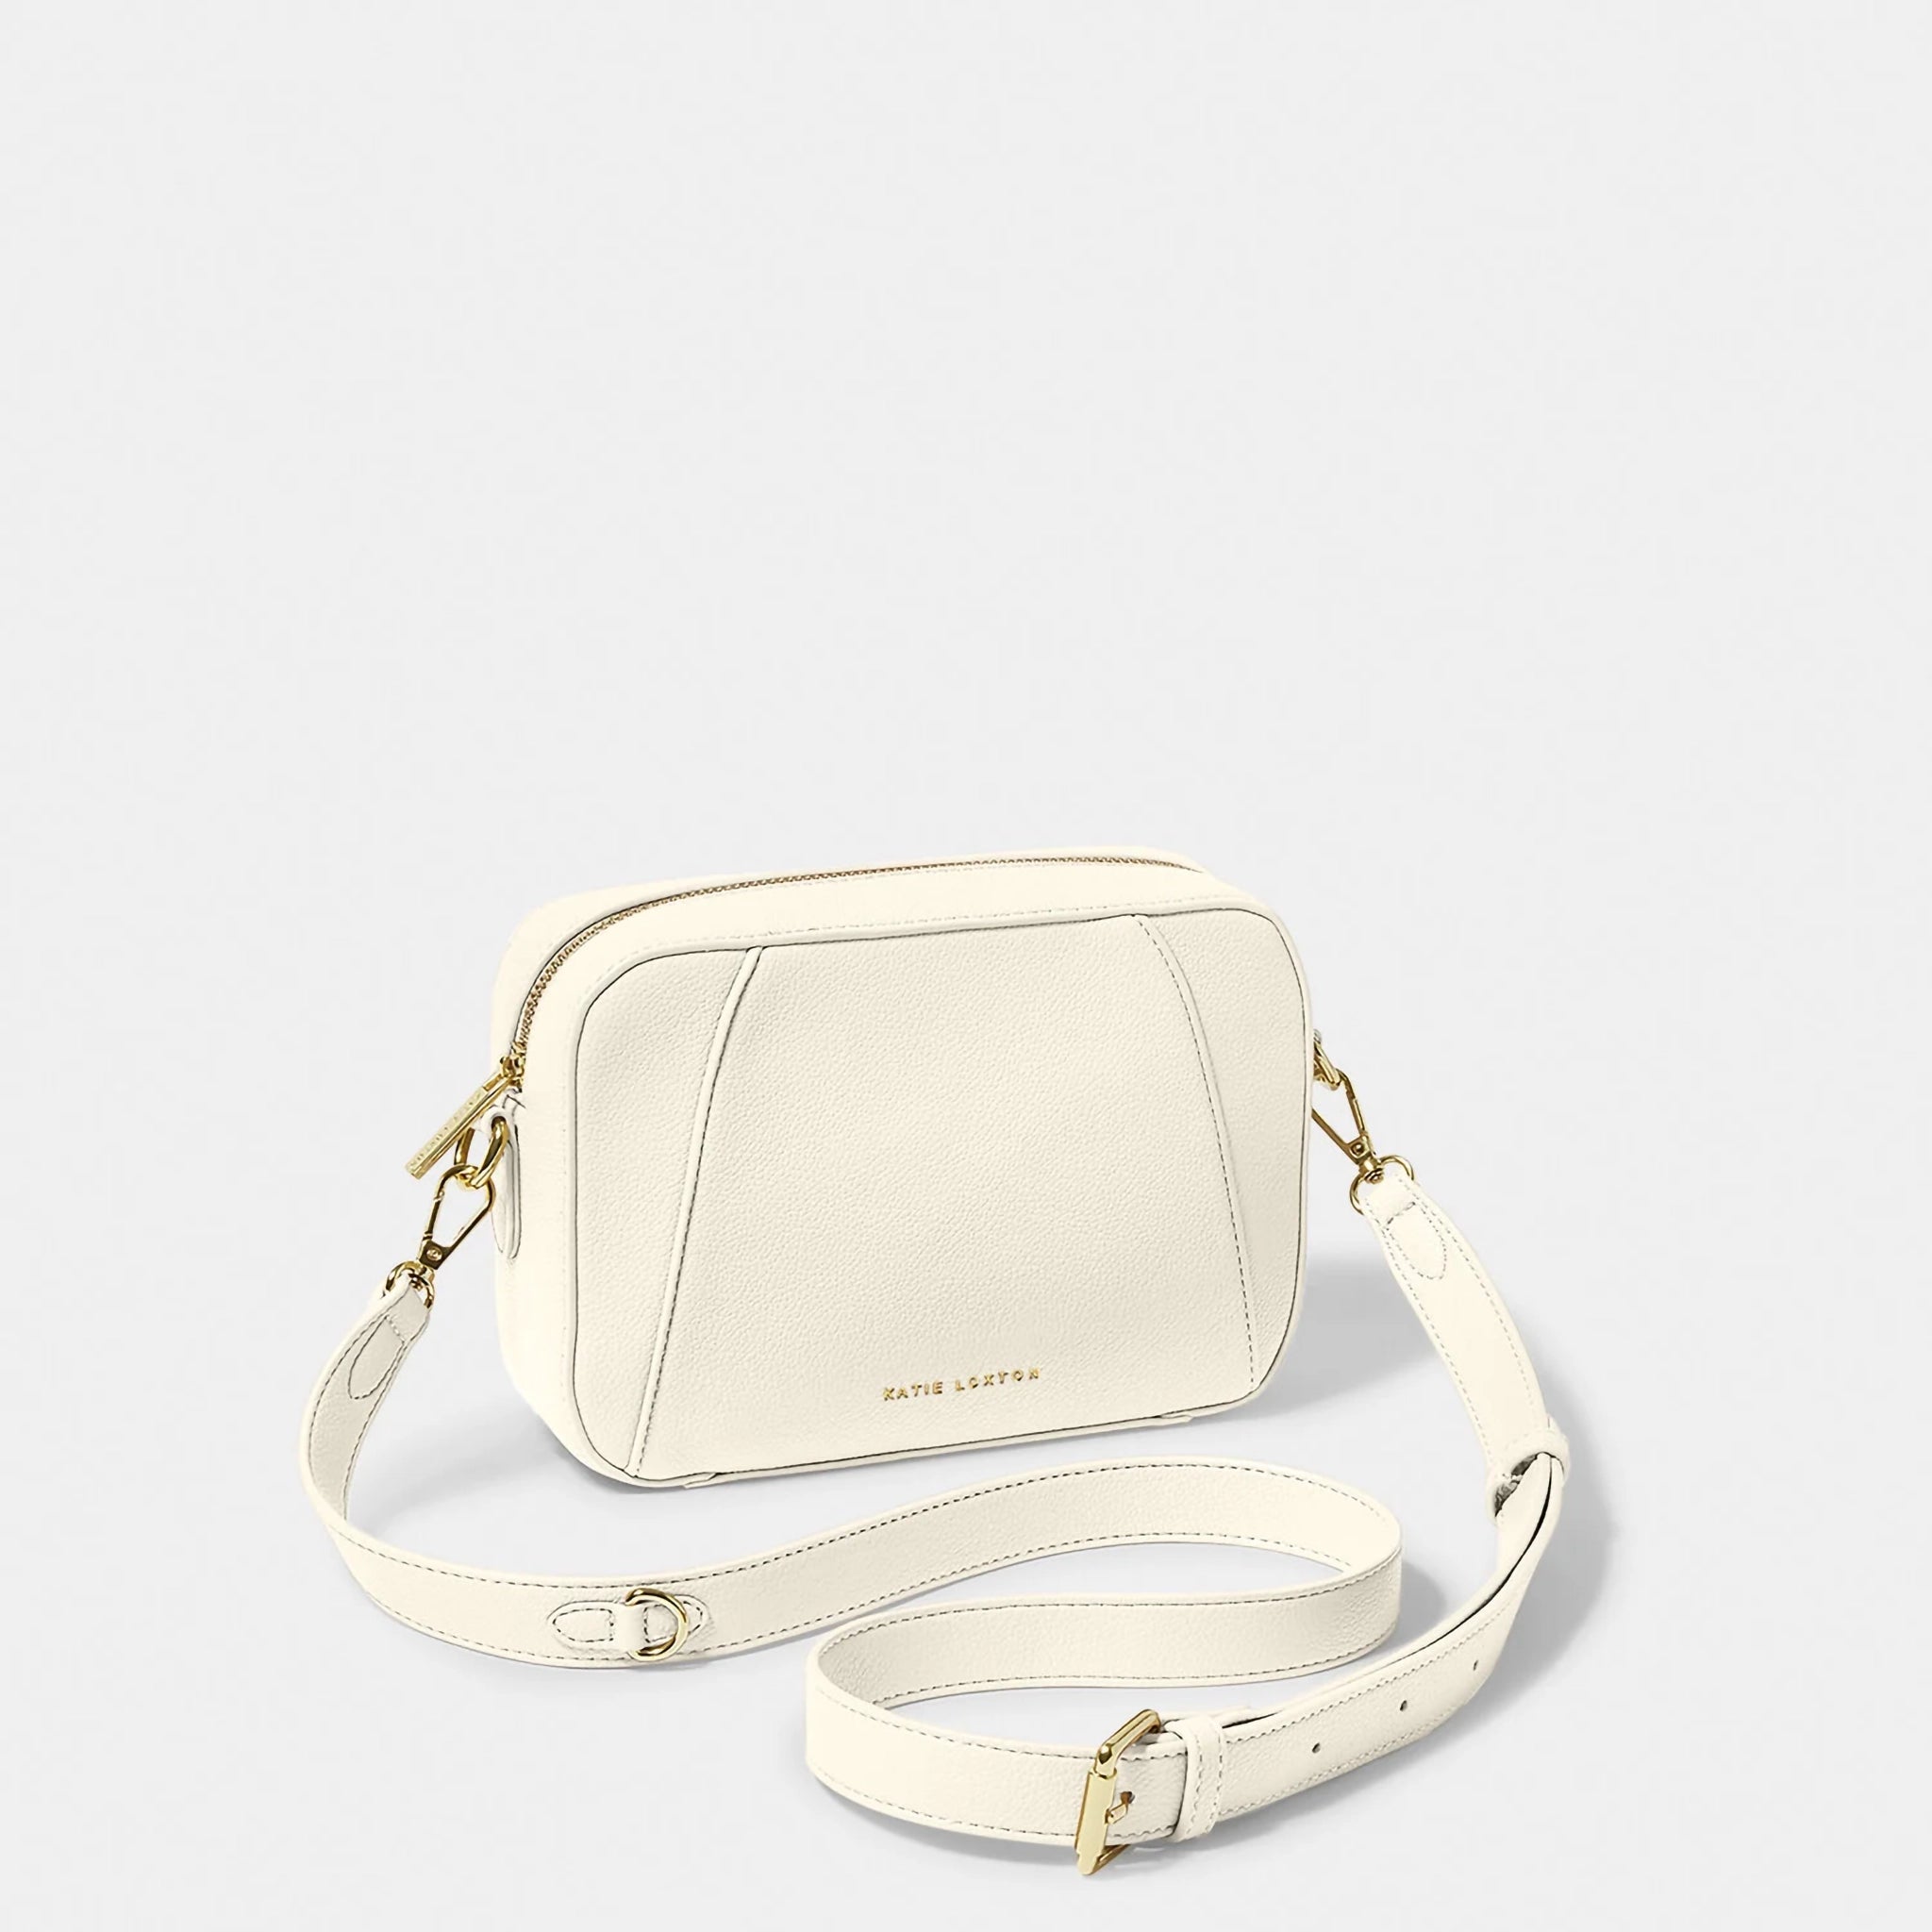 A ecru crossbody bag in a simple box shape with adjustable strap and gold hardware